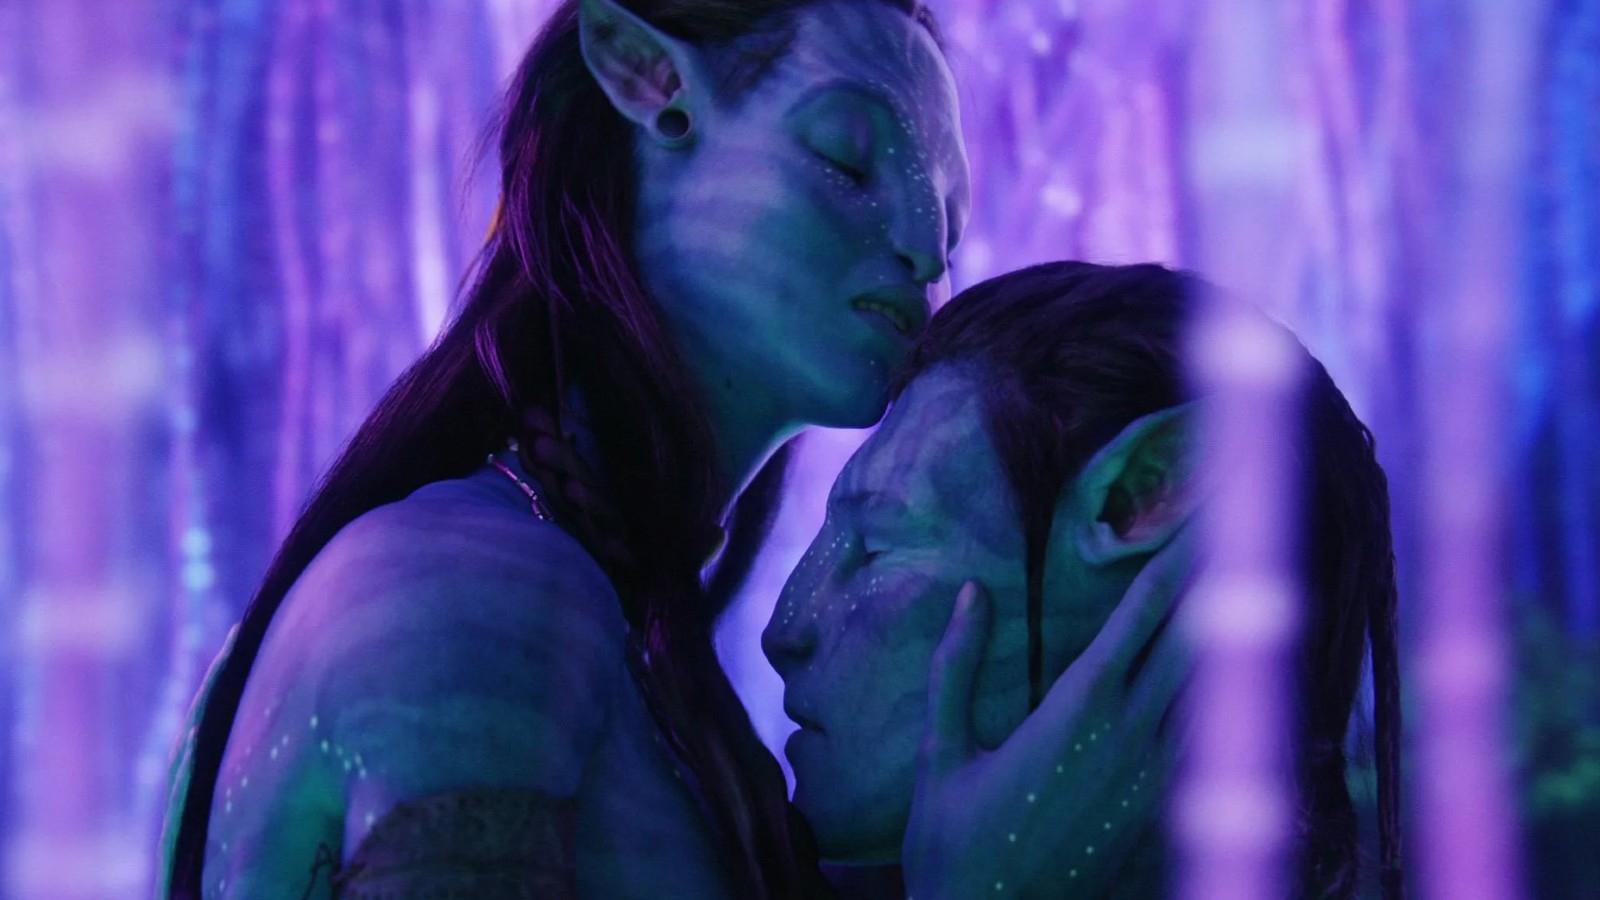 Is there any sex scenes in avatar 2